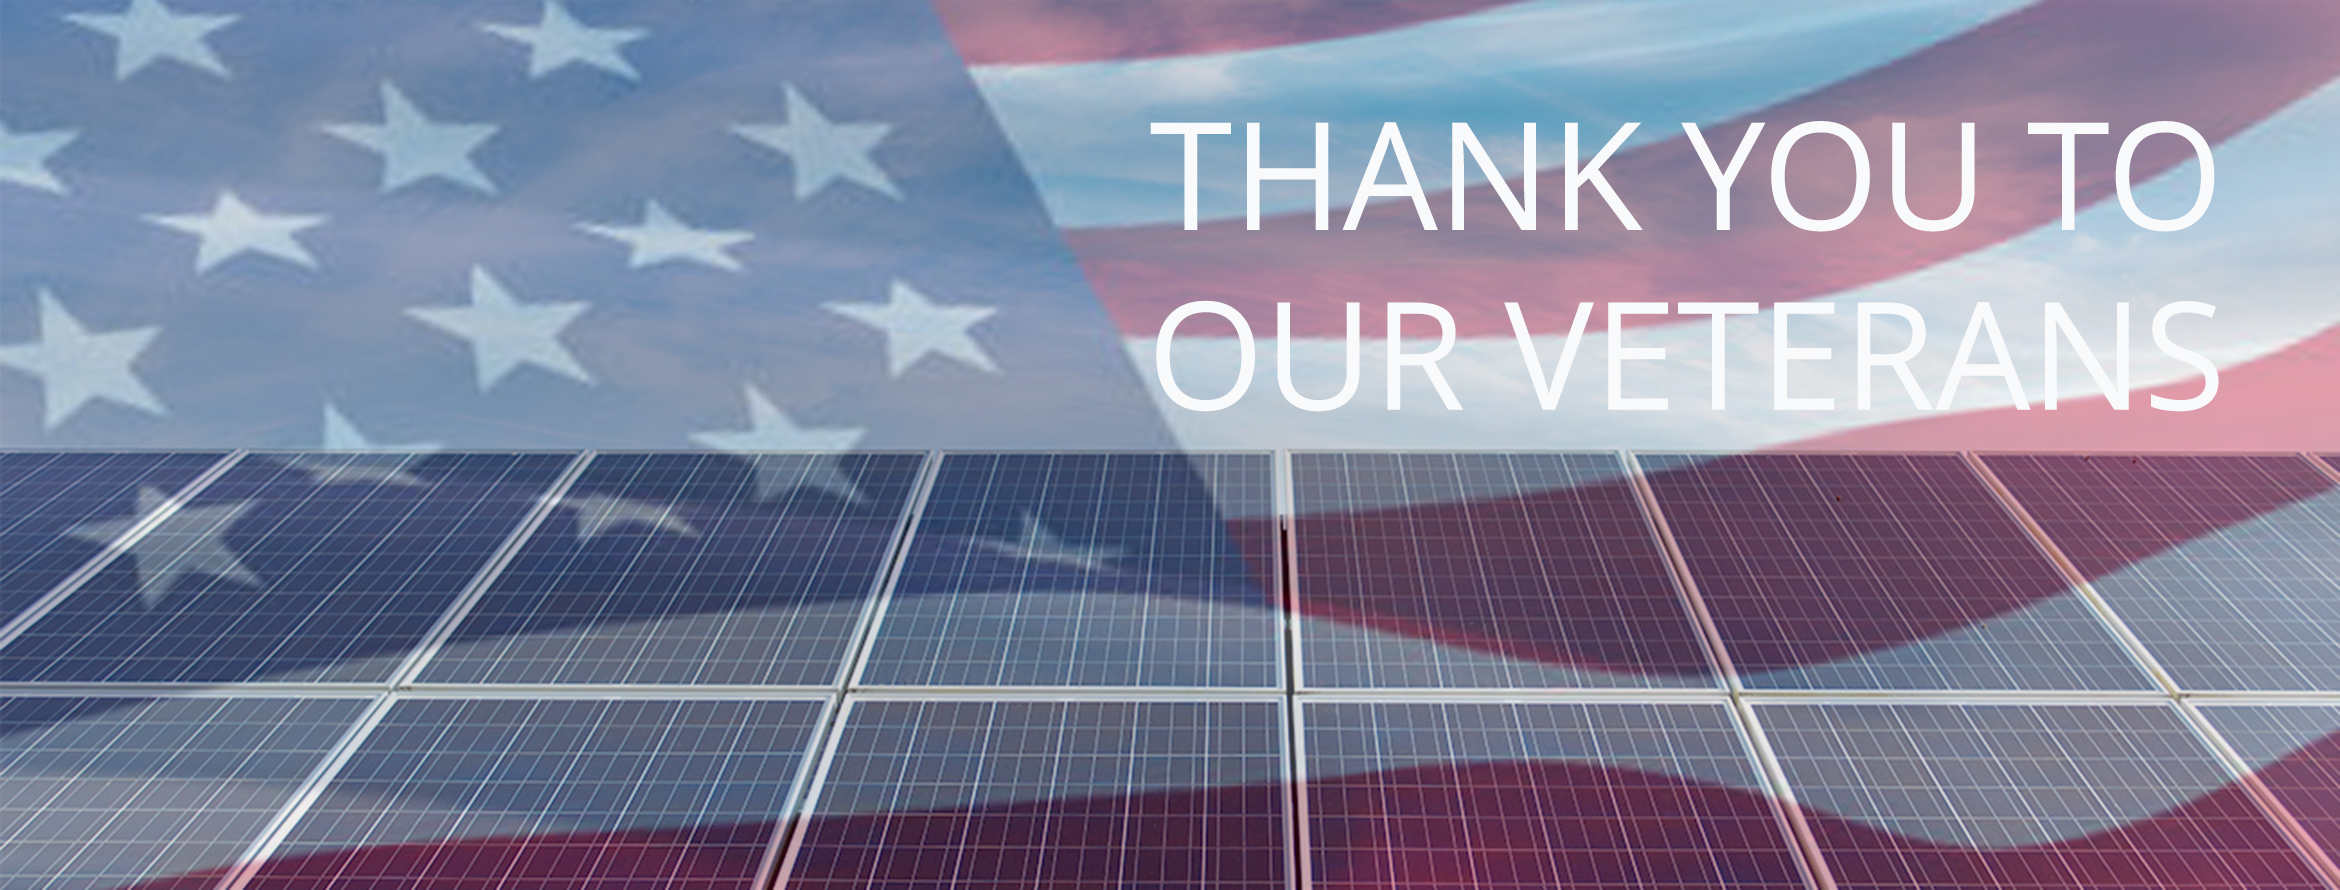 Thank you to our solar veterans